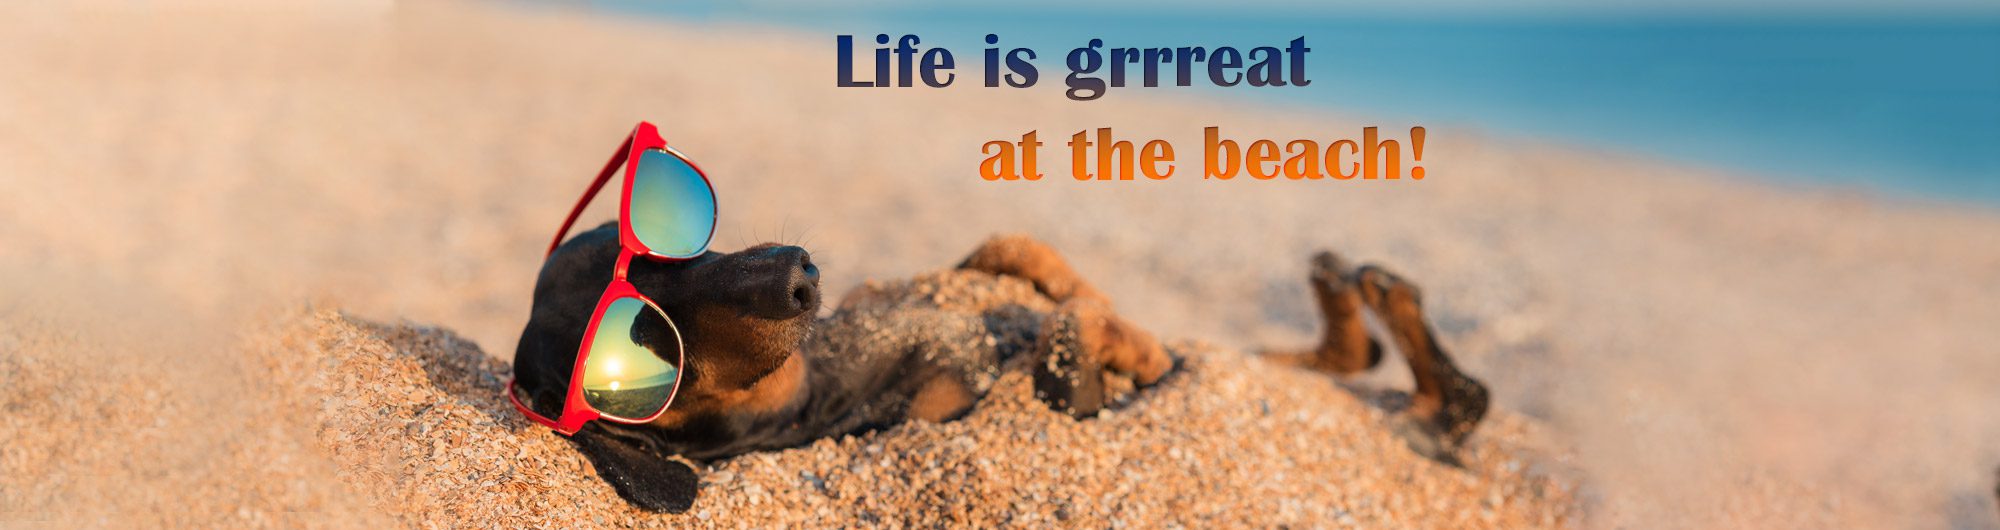 Life is grrrreat at the beach!